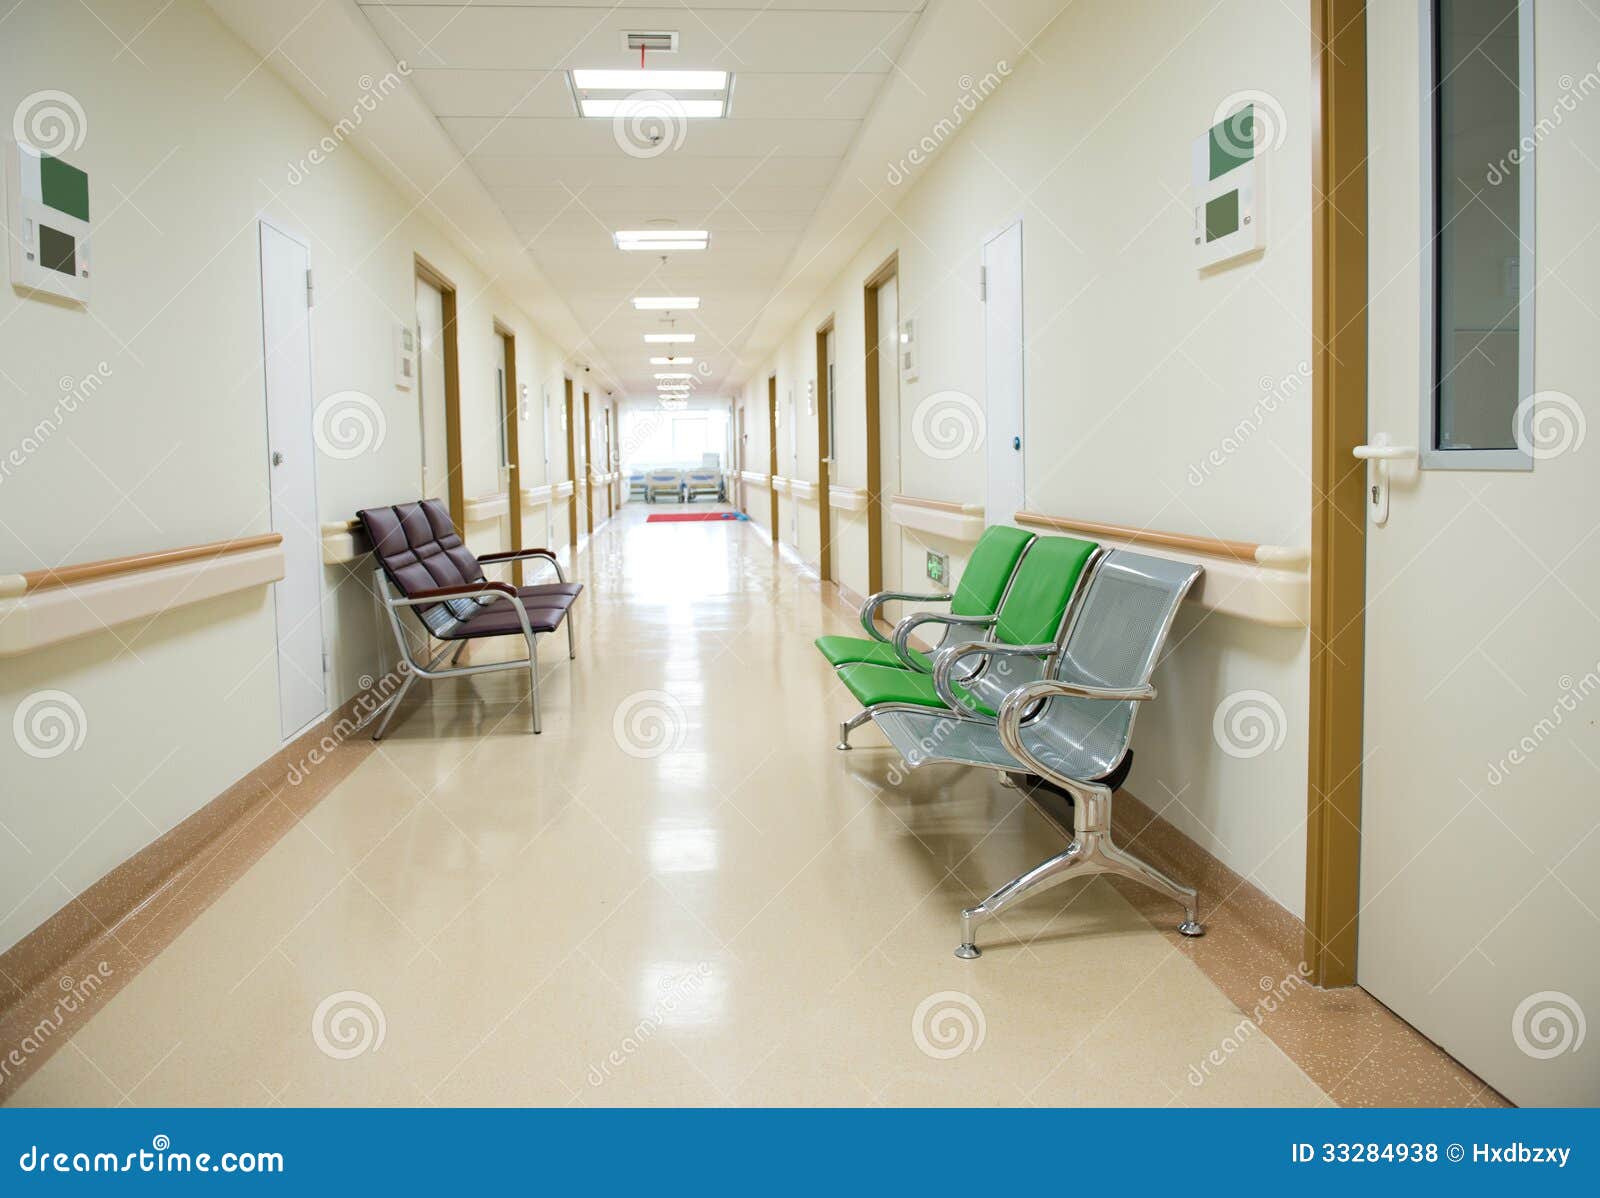 Hospital Hallway Stock Photo Image Of Building Color